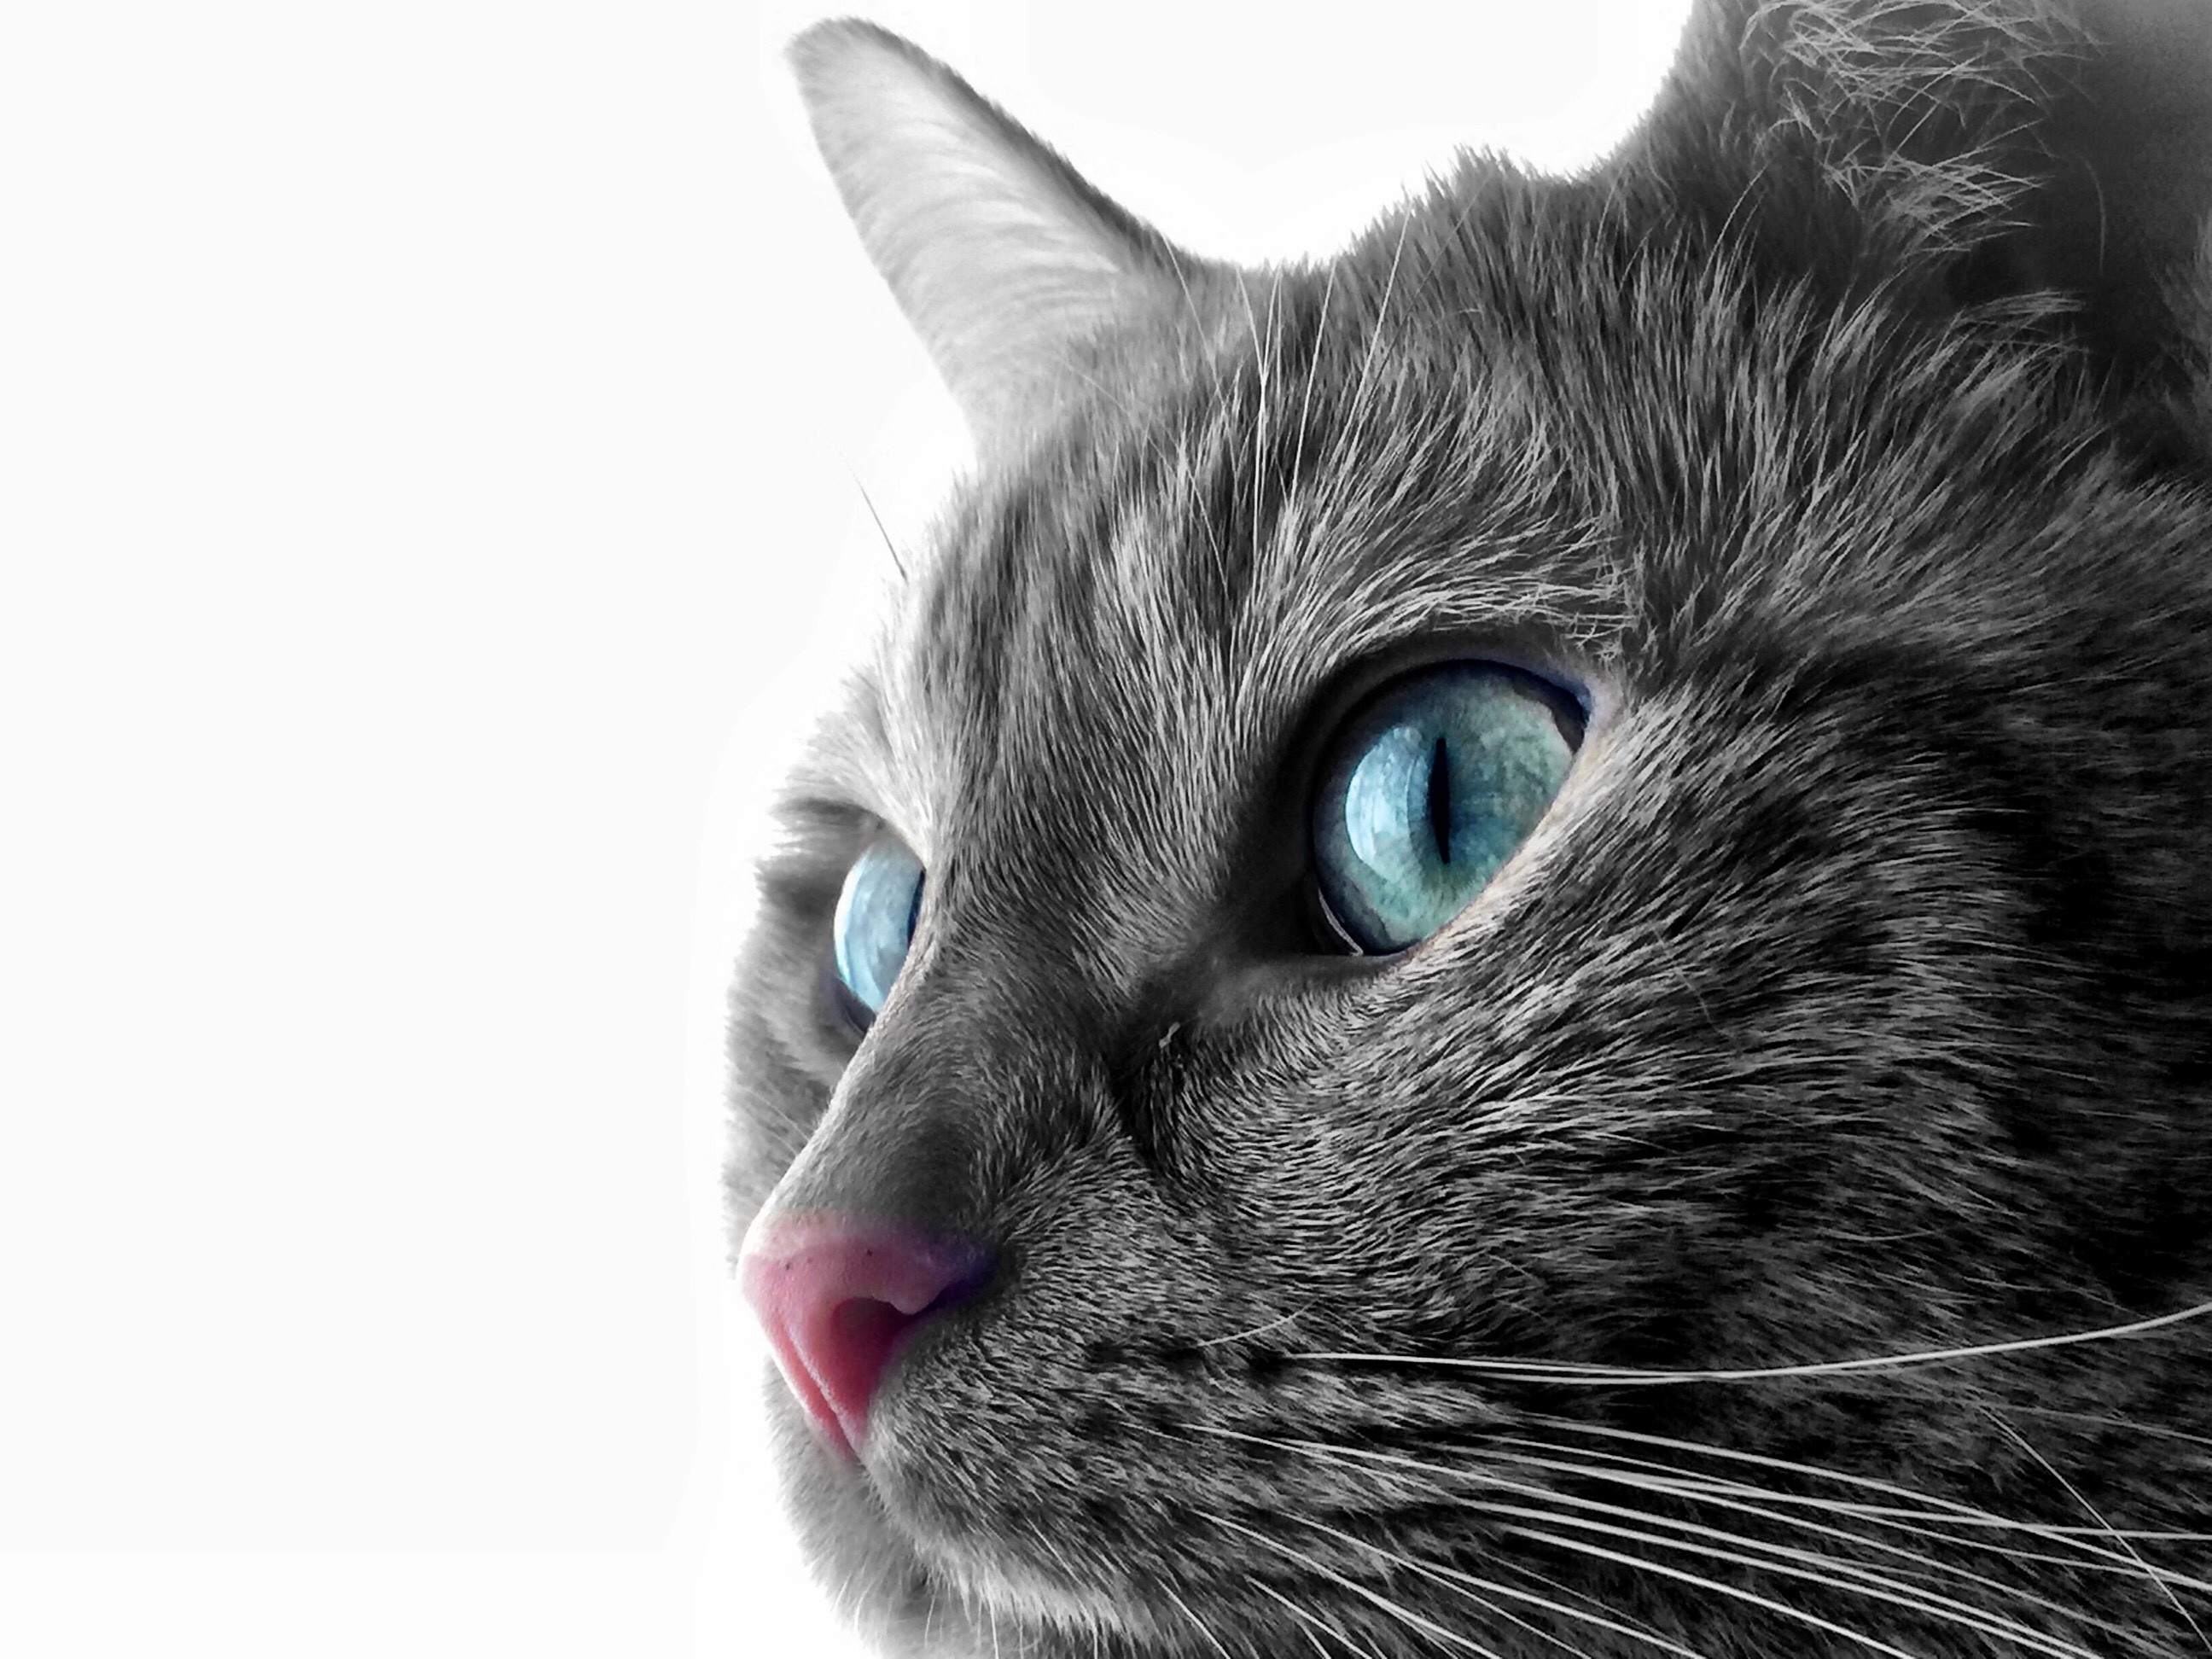 General 2592x1944 cats pet animals blue eyes mammals animal eyes closeup simple background white background